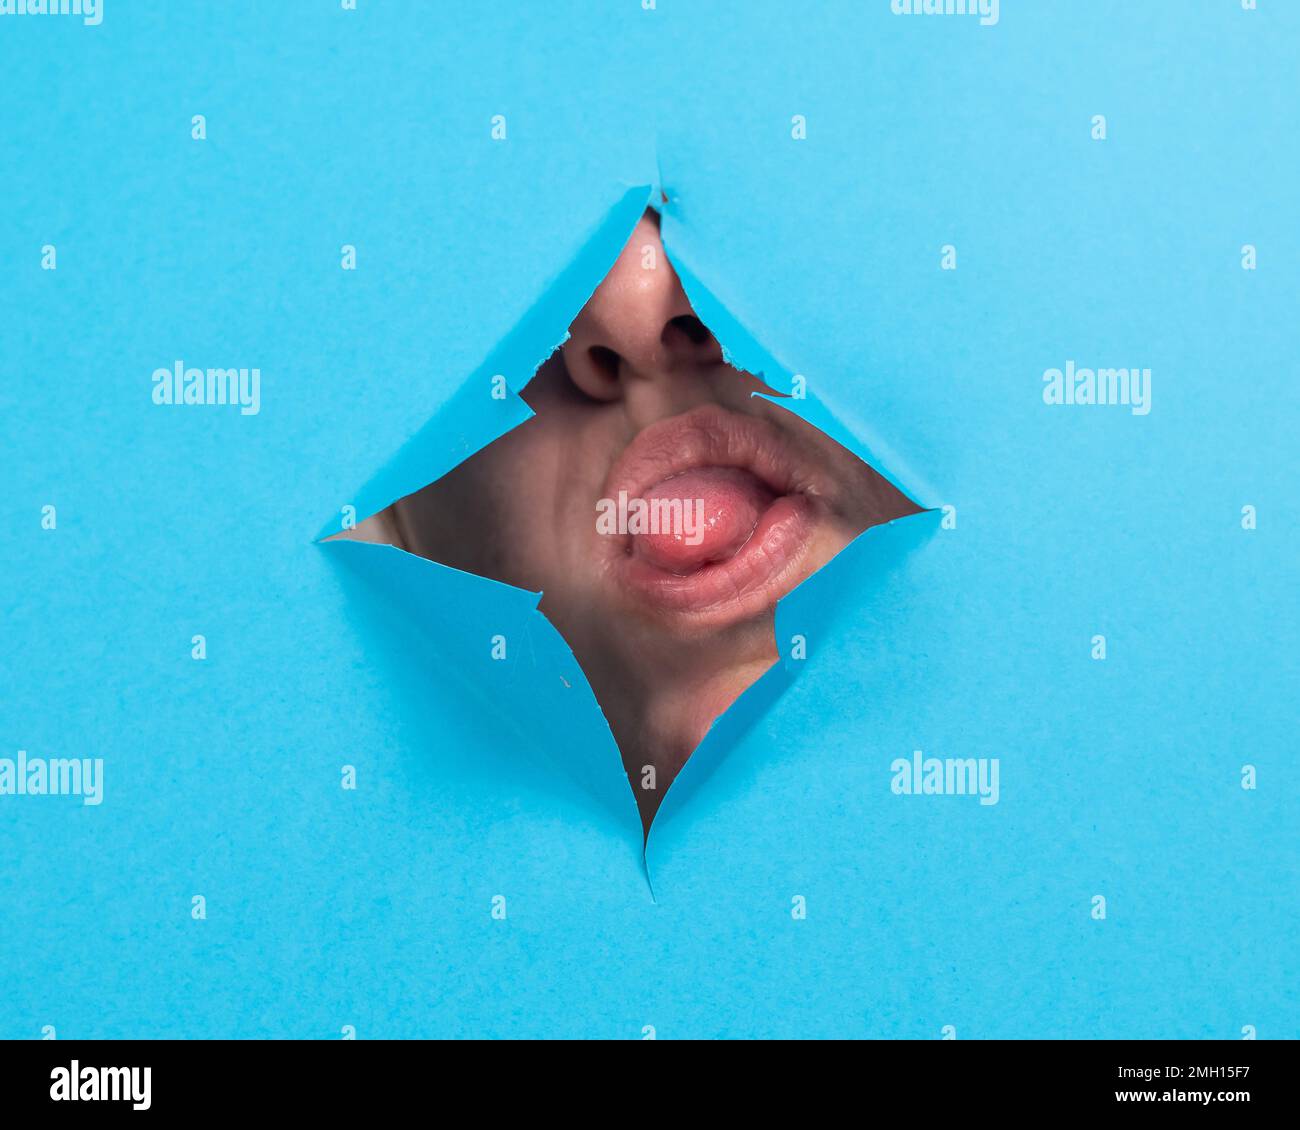 Woman sticking her tongue out of a hole on blue paper background.  Stock Photo